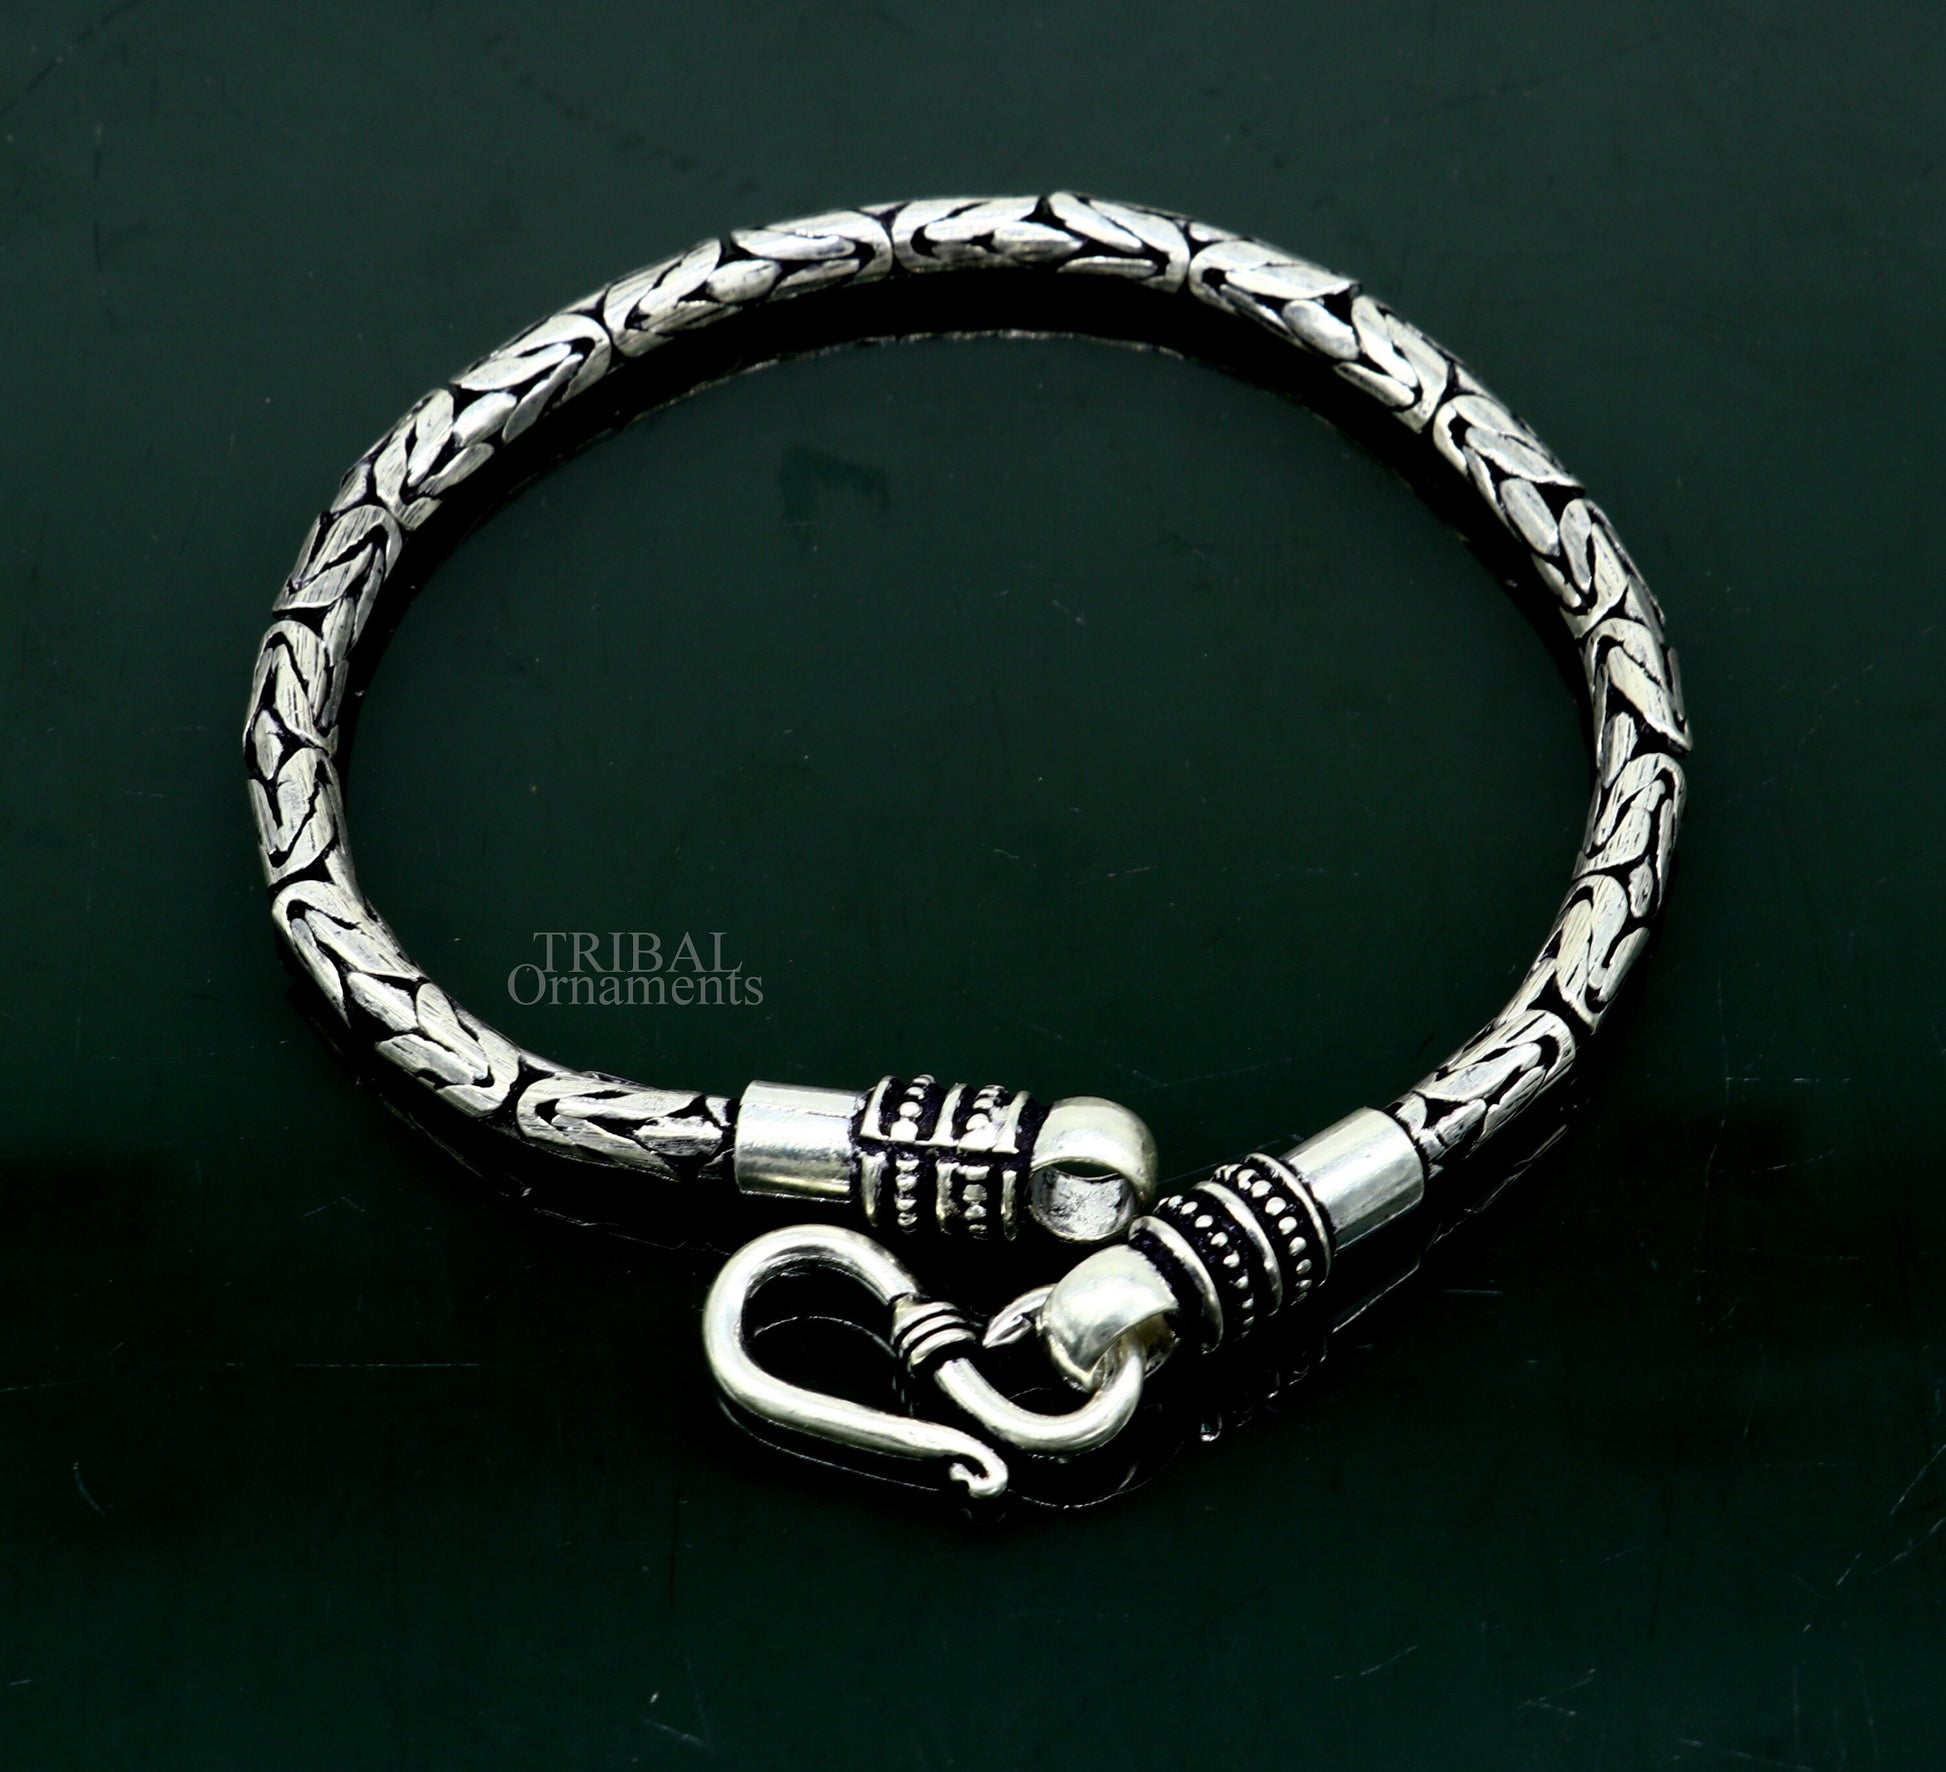 All size 4MM vintage style handmade solid 925 sterling silver bracelet unisex gifting tribal stylish jewelry for men's and women's Rsbr370 - TRIBAL ORNAMENTS